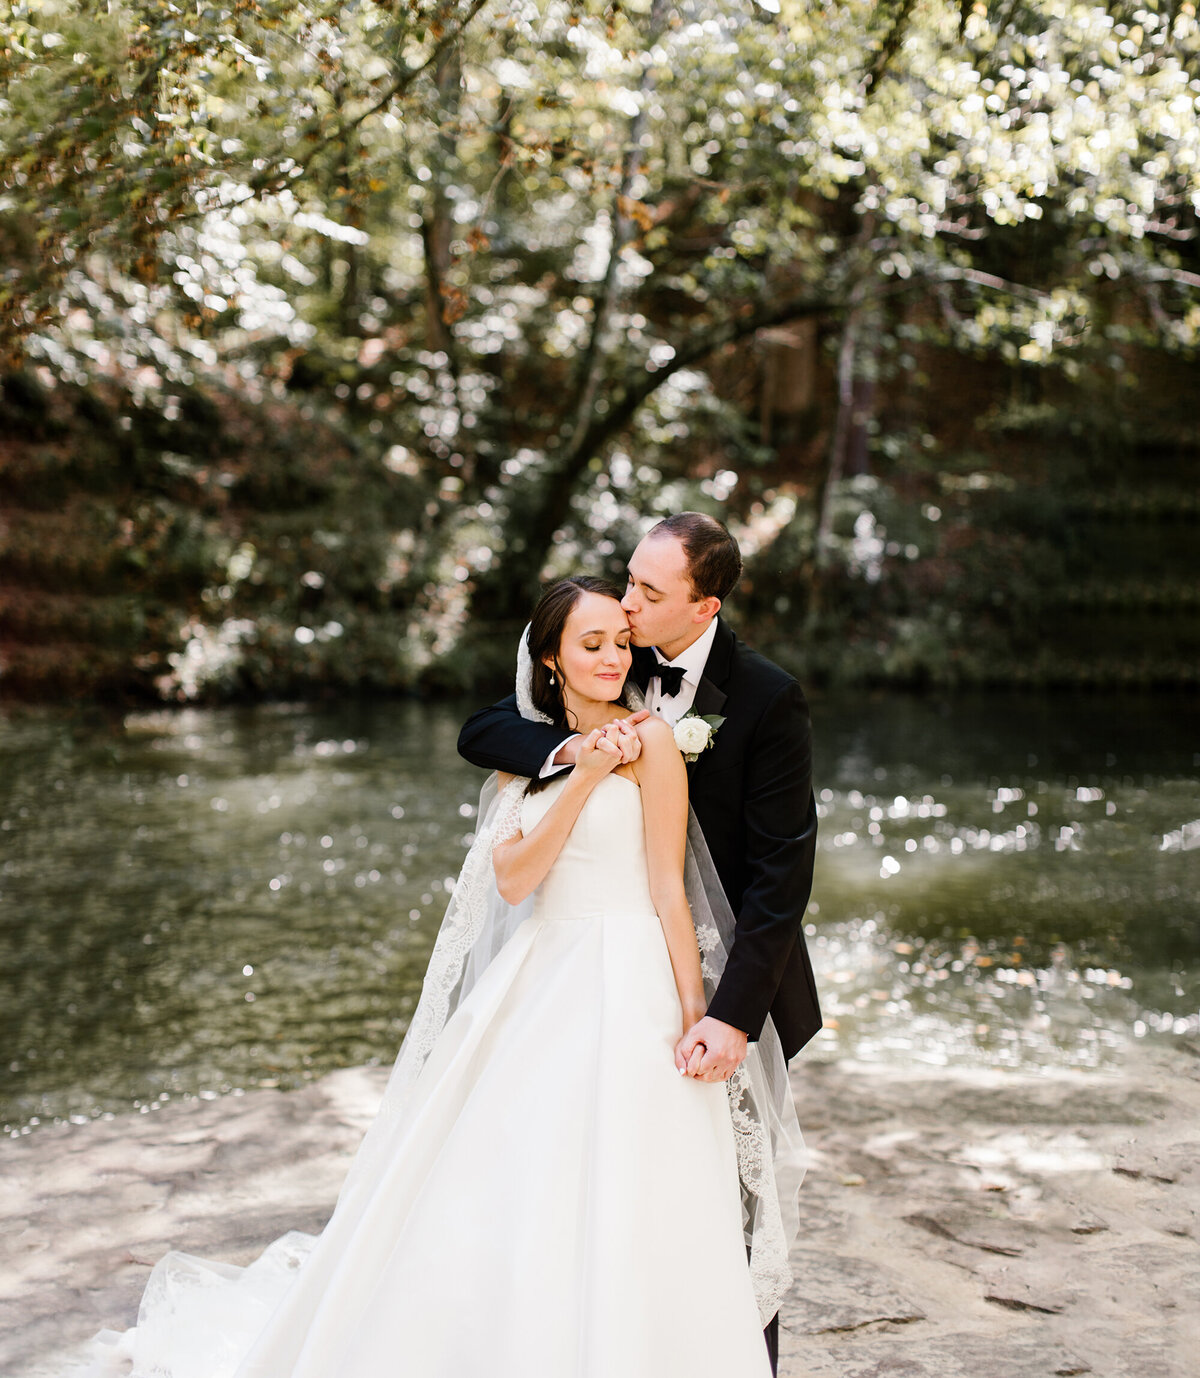 Swann Lake Stables Wedding by Maddie Moore Photography Birmingham Alabama and Kalee Baker Planning